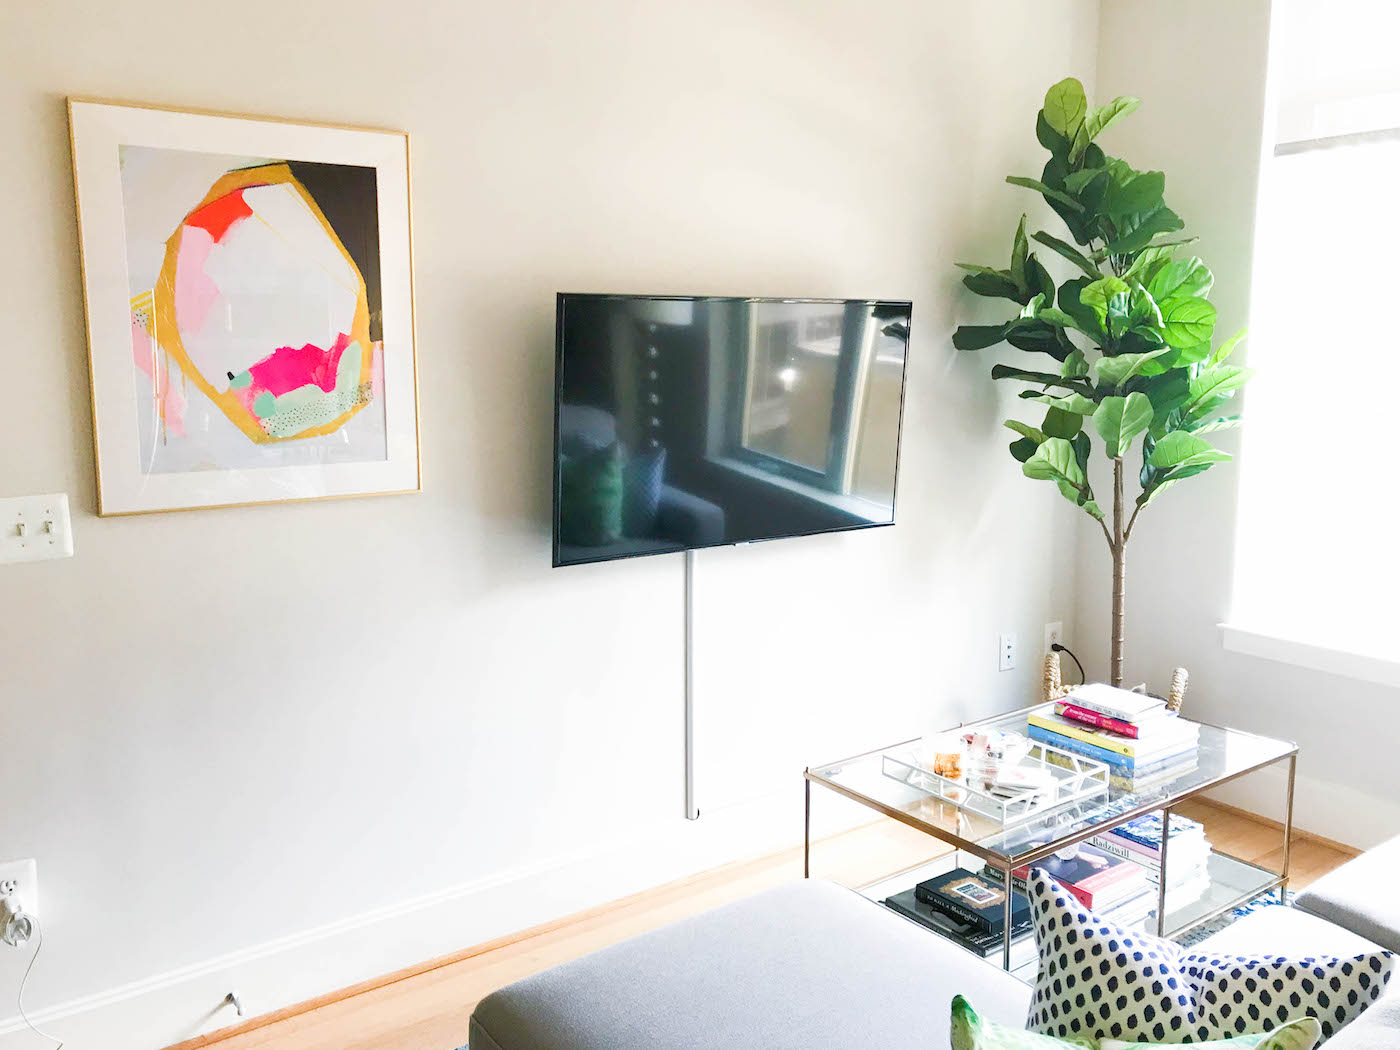 Can You Mount A TV In An Apartment?